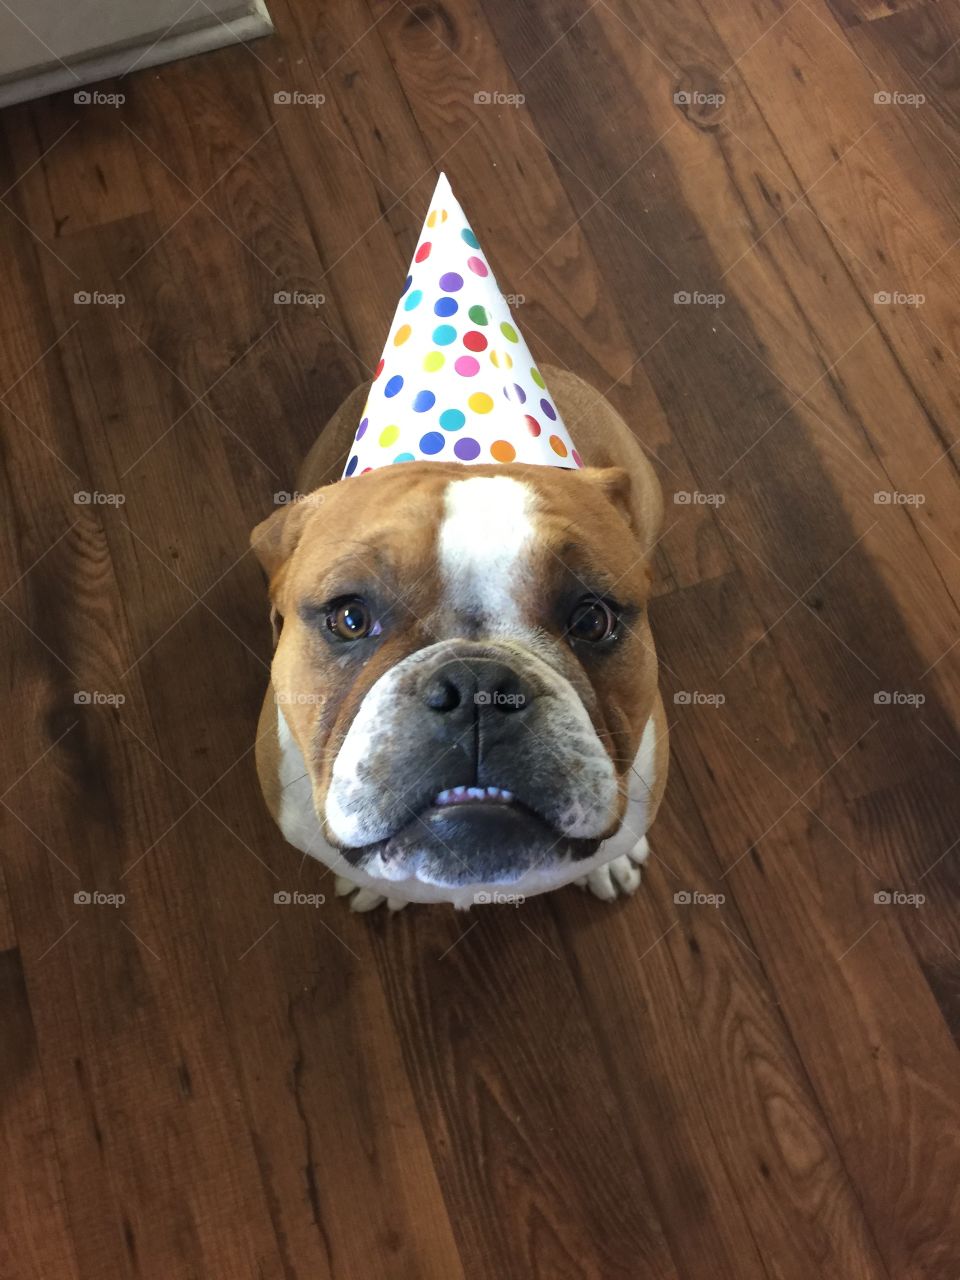 California. Where it's not weird to celebrate your dogs birthday. 